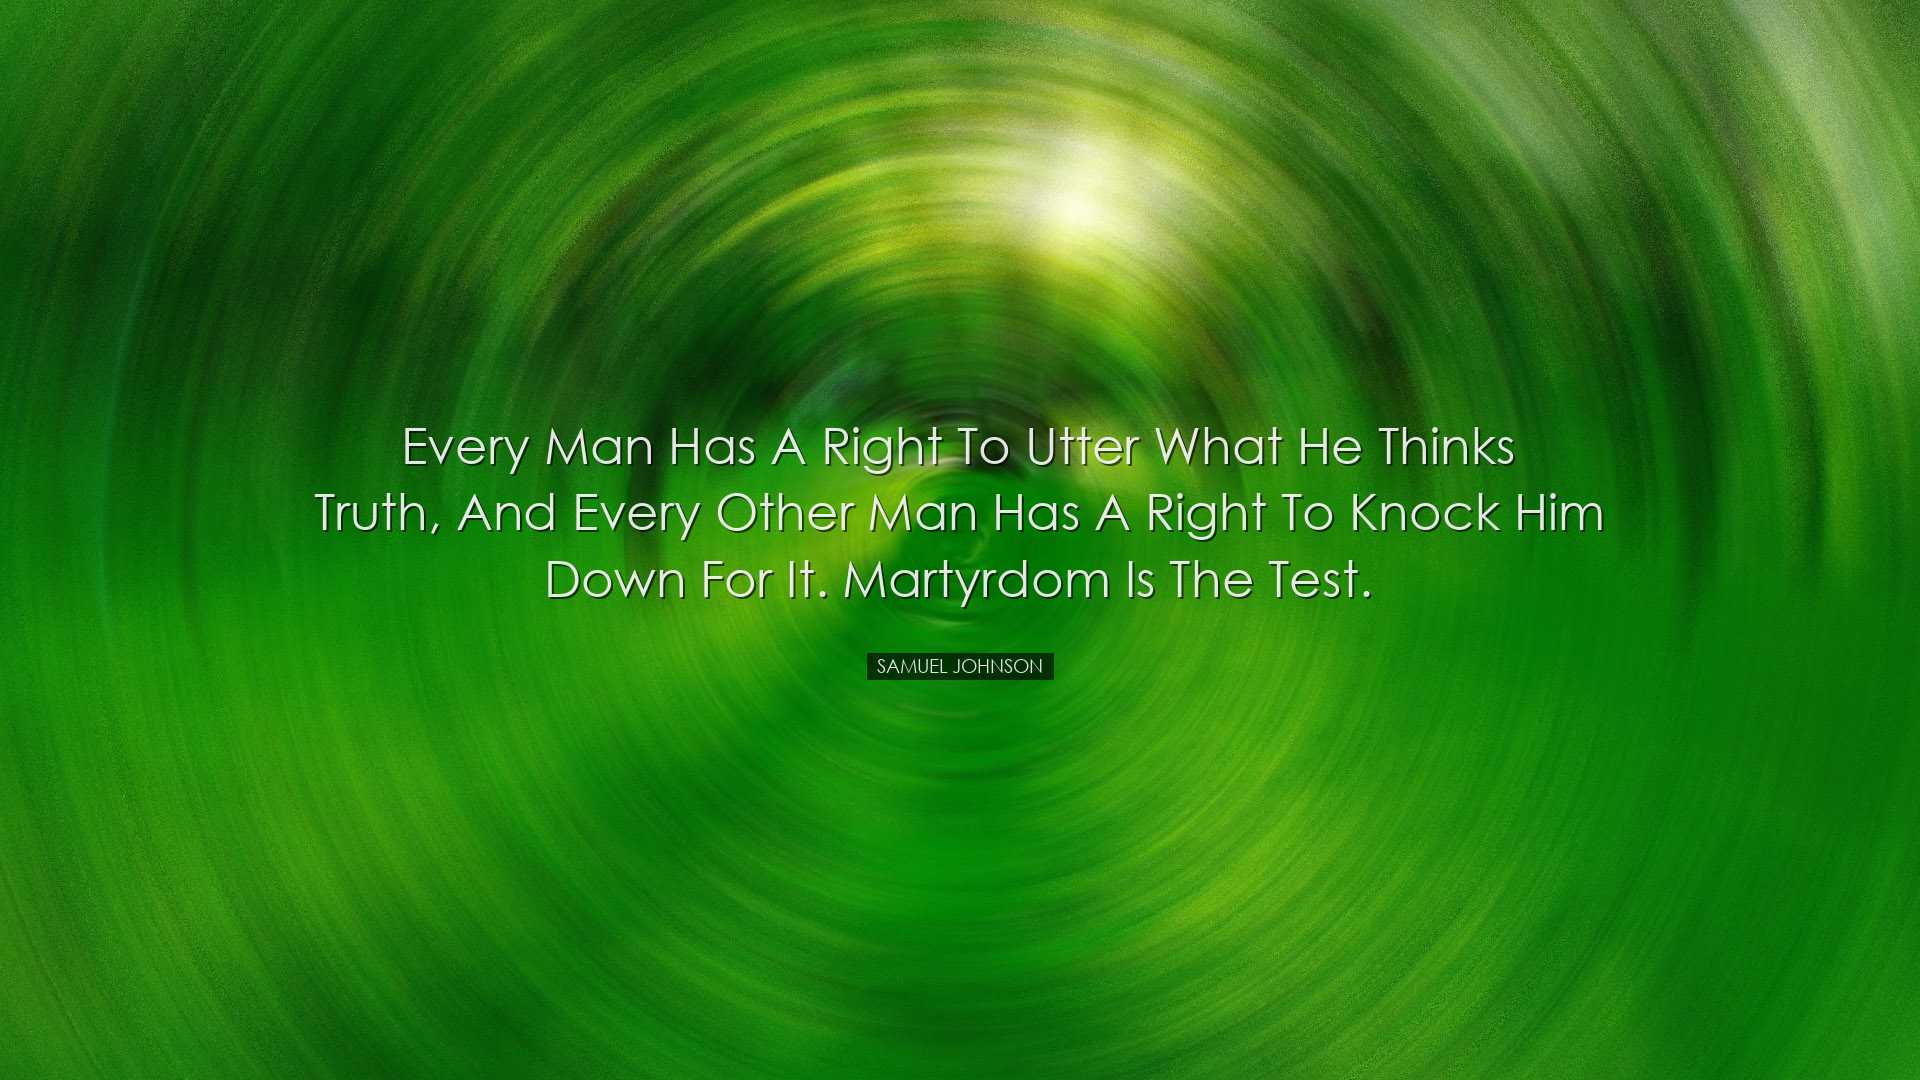 Every man has a right to utter what he thinks truth, and every oth